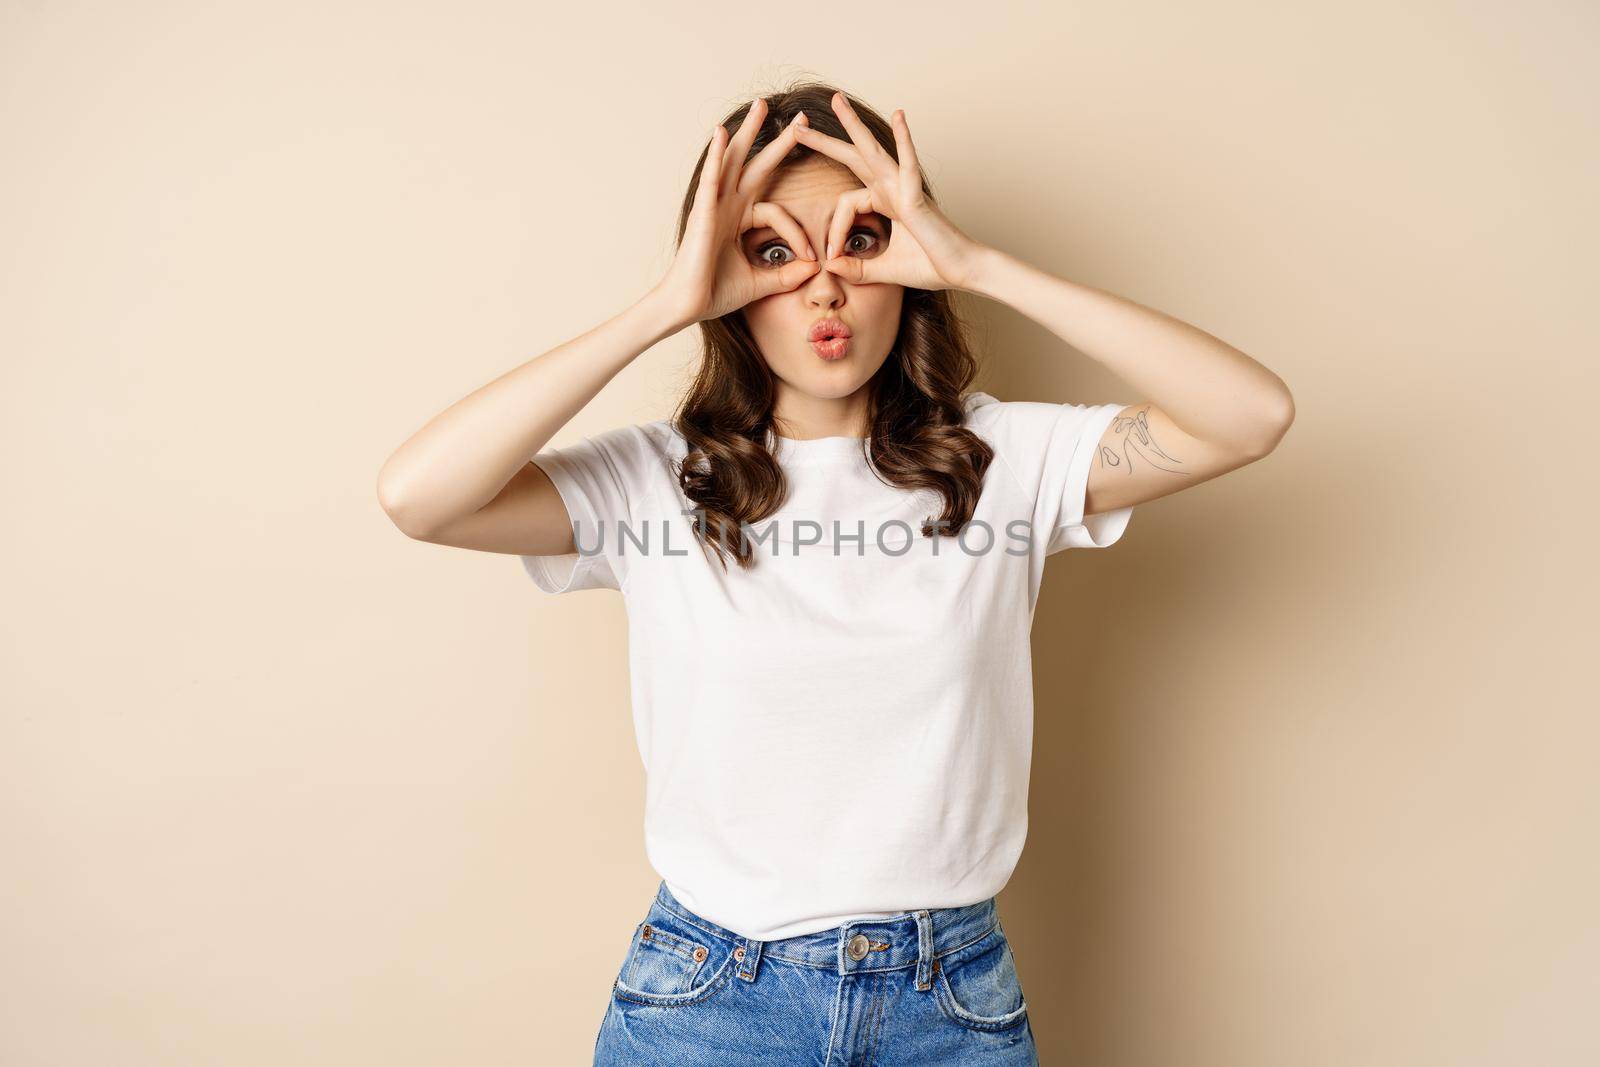 Funny brunette woman having fun, showing finger glasses gesture and fool around, posing over beige background.